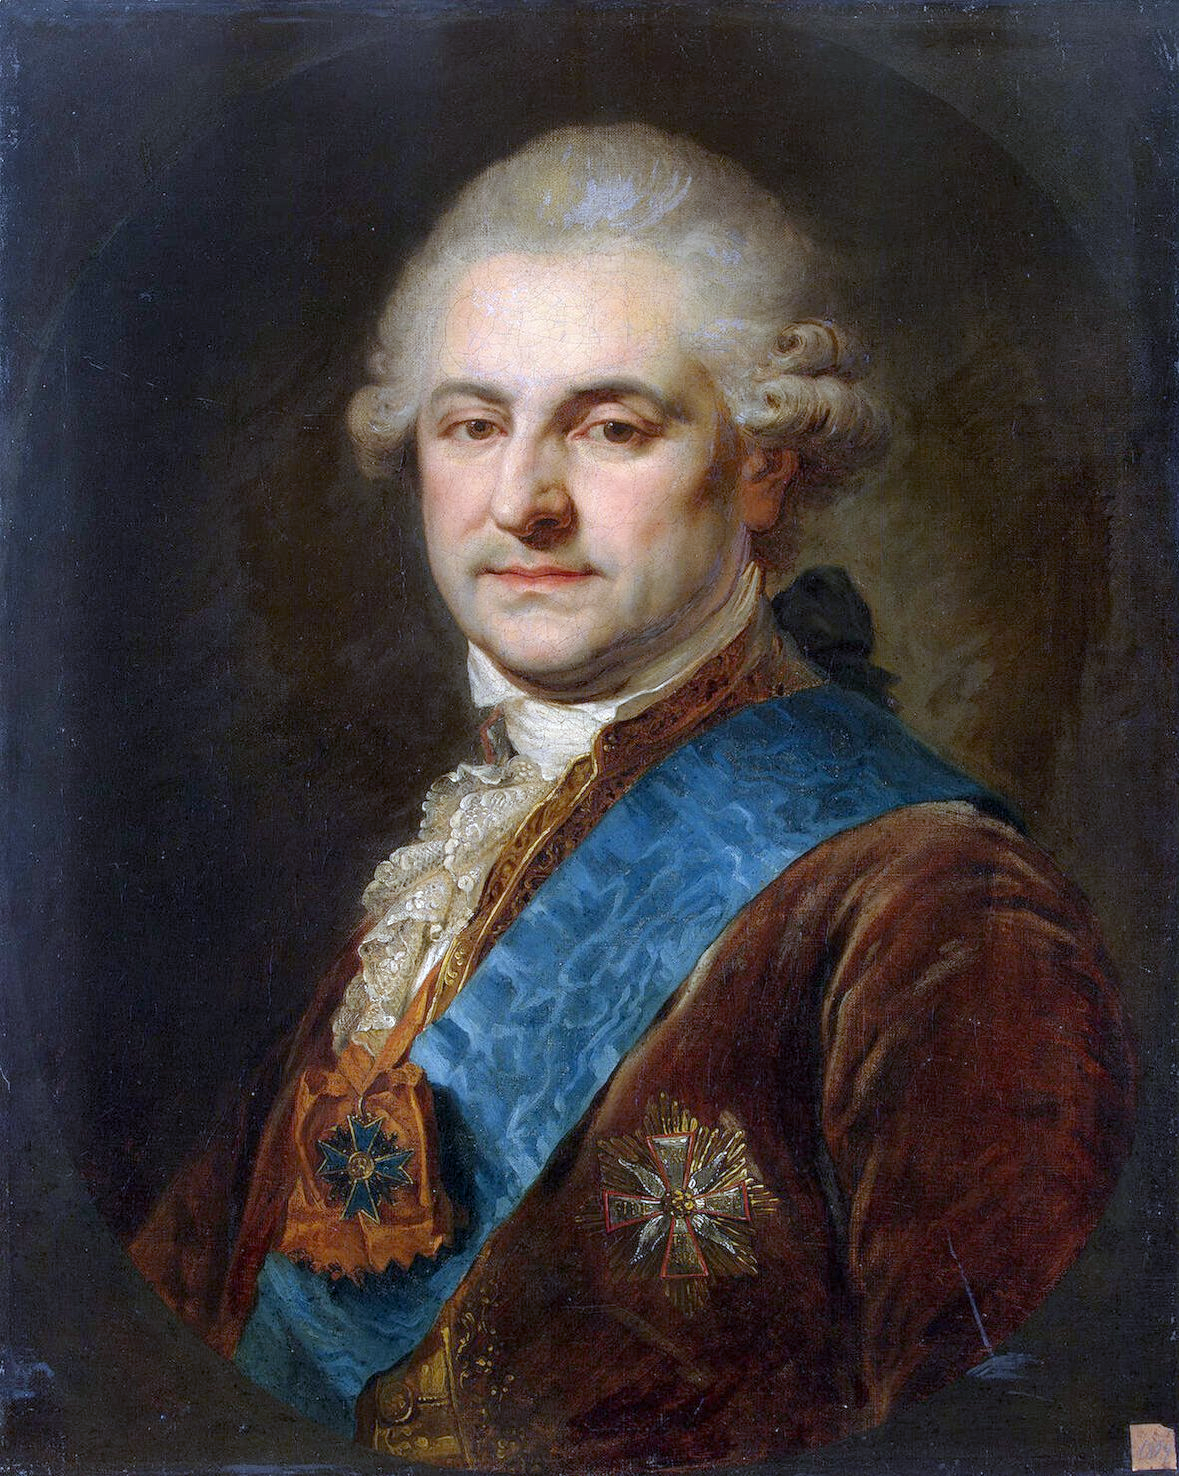 Stanis%C5%82aw_August_Poniatowski_by_Johann_Baptist_Lampi.PNG